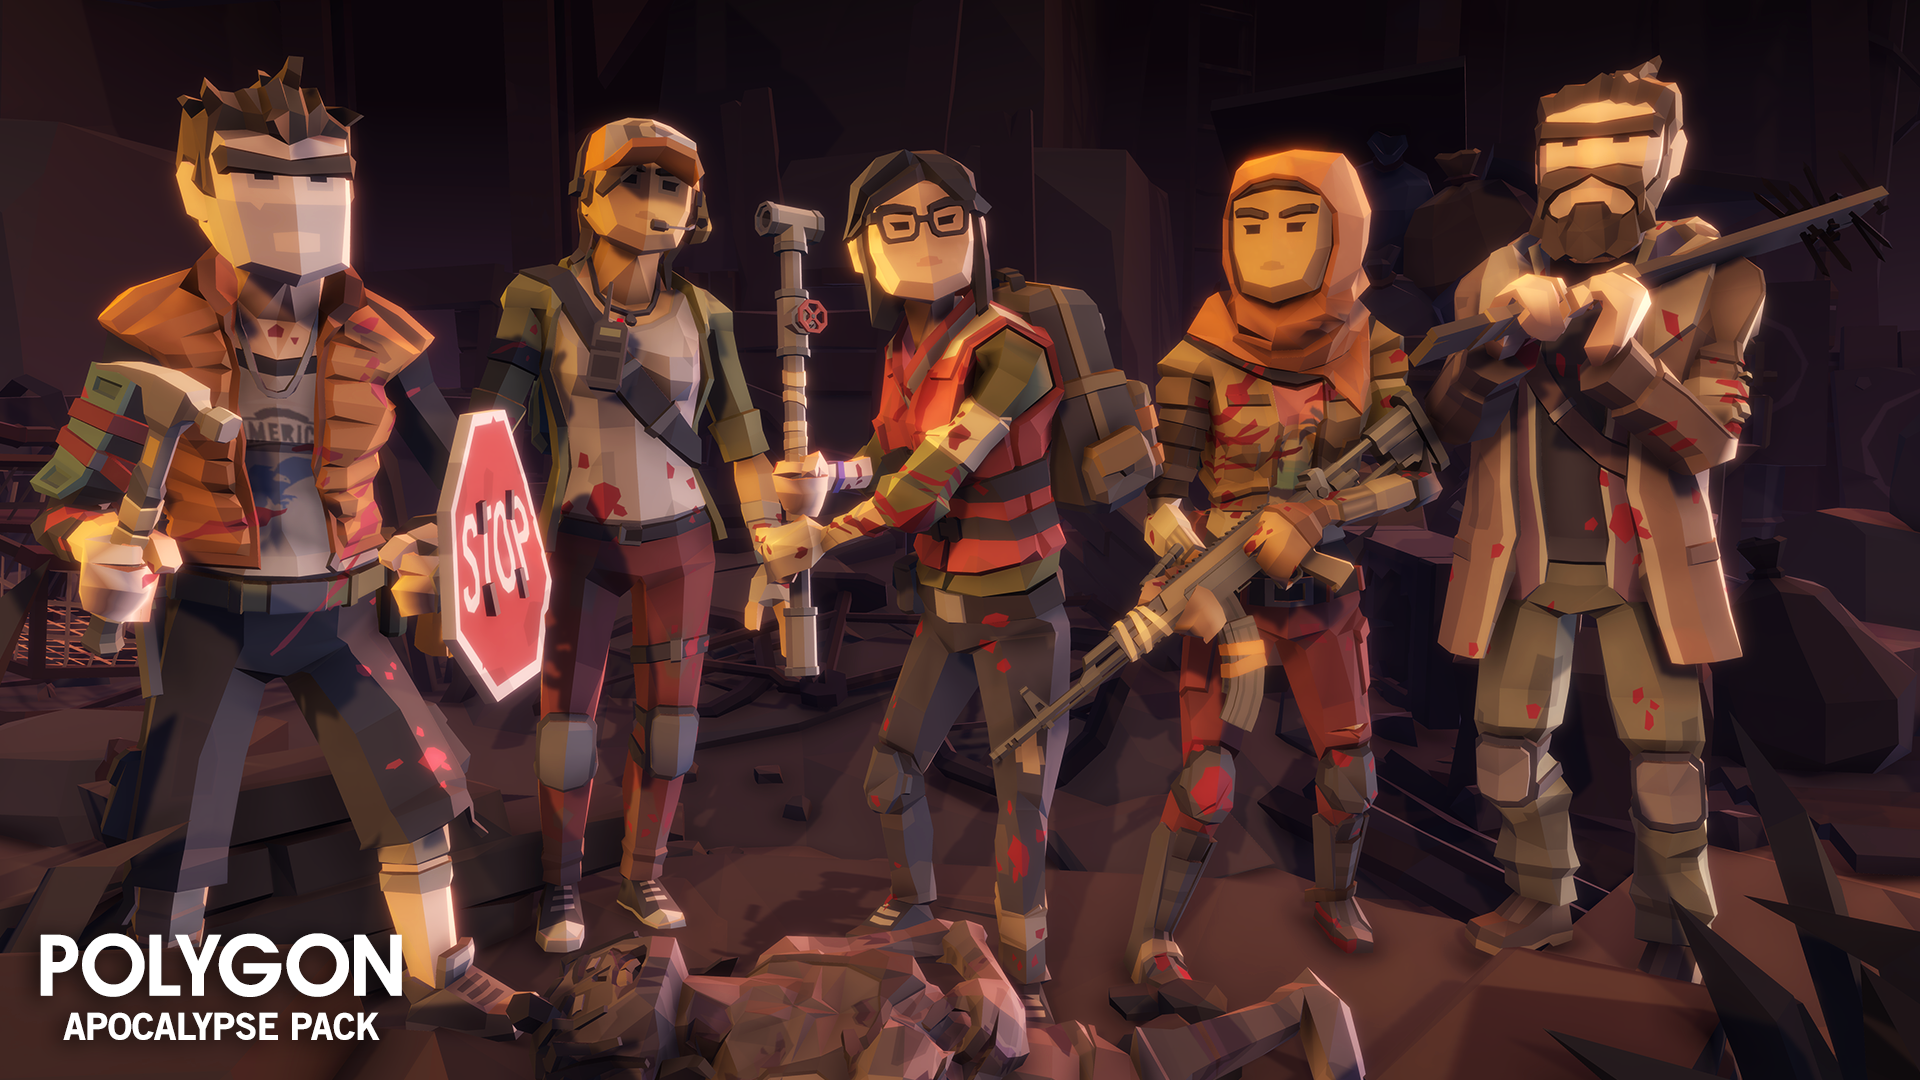 Apocalypse Pack 3D low poly adventurer character assets for game development